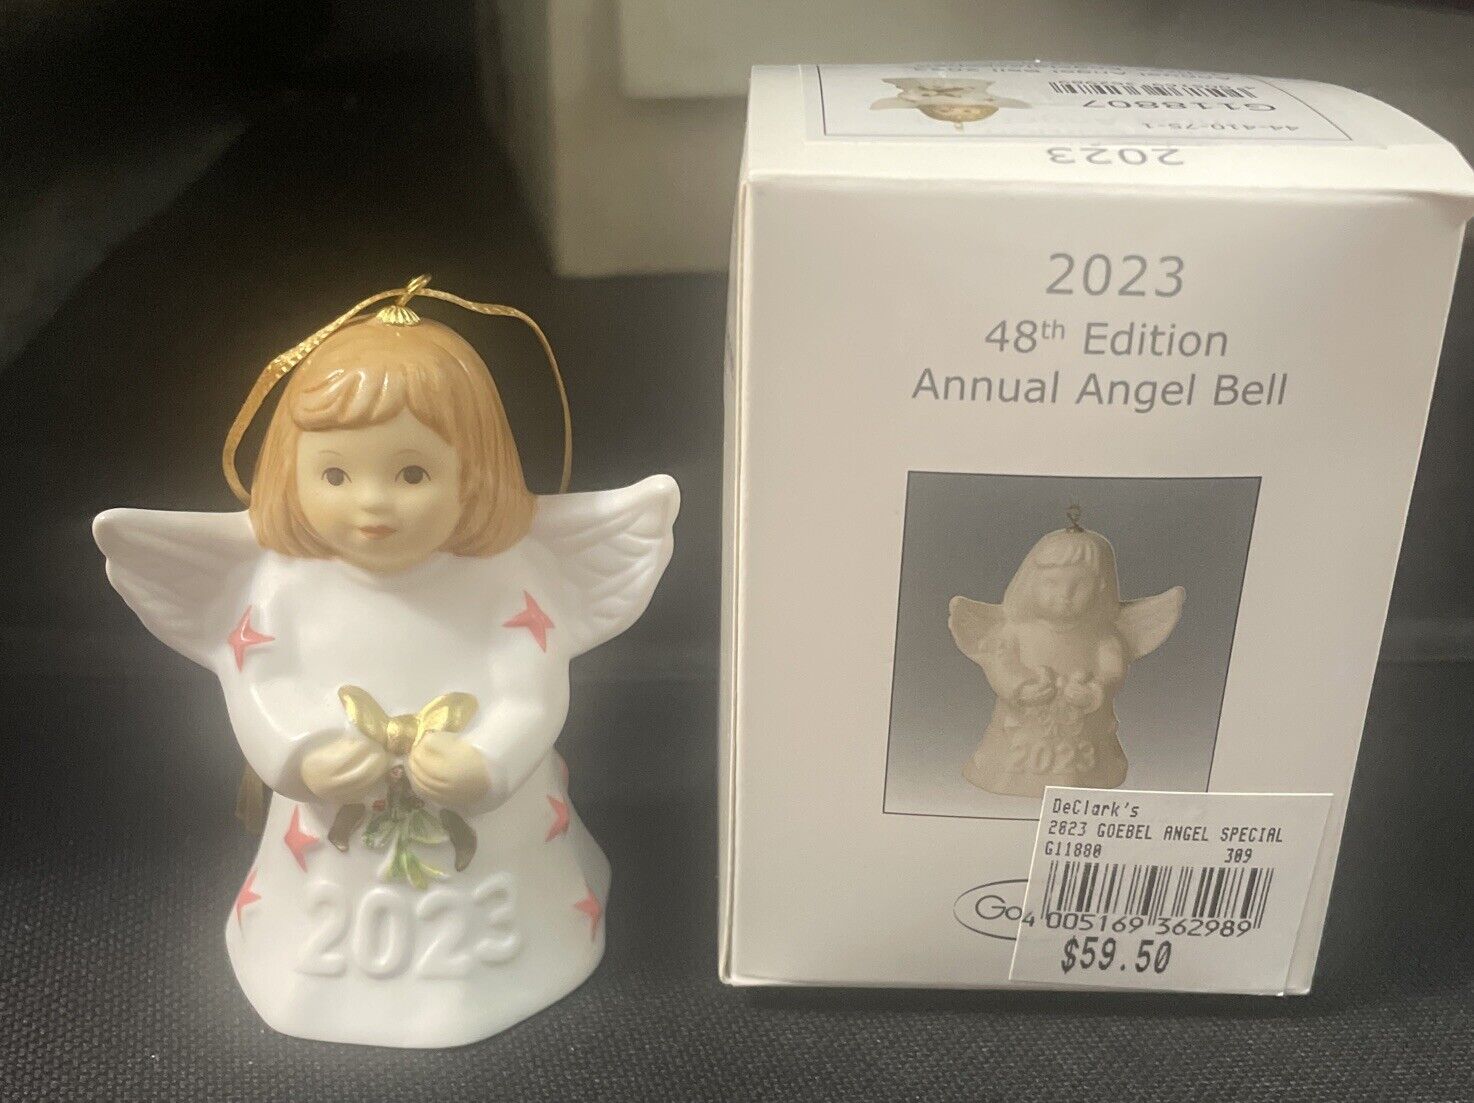 GOEBEL,  2023 ANNUAL ANGEL BELL, 48TH EDITION, PARTIALLY PAINTED, BRAND NEW, MIB